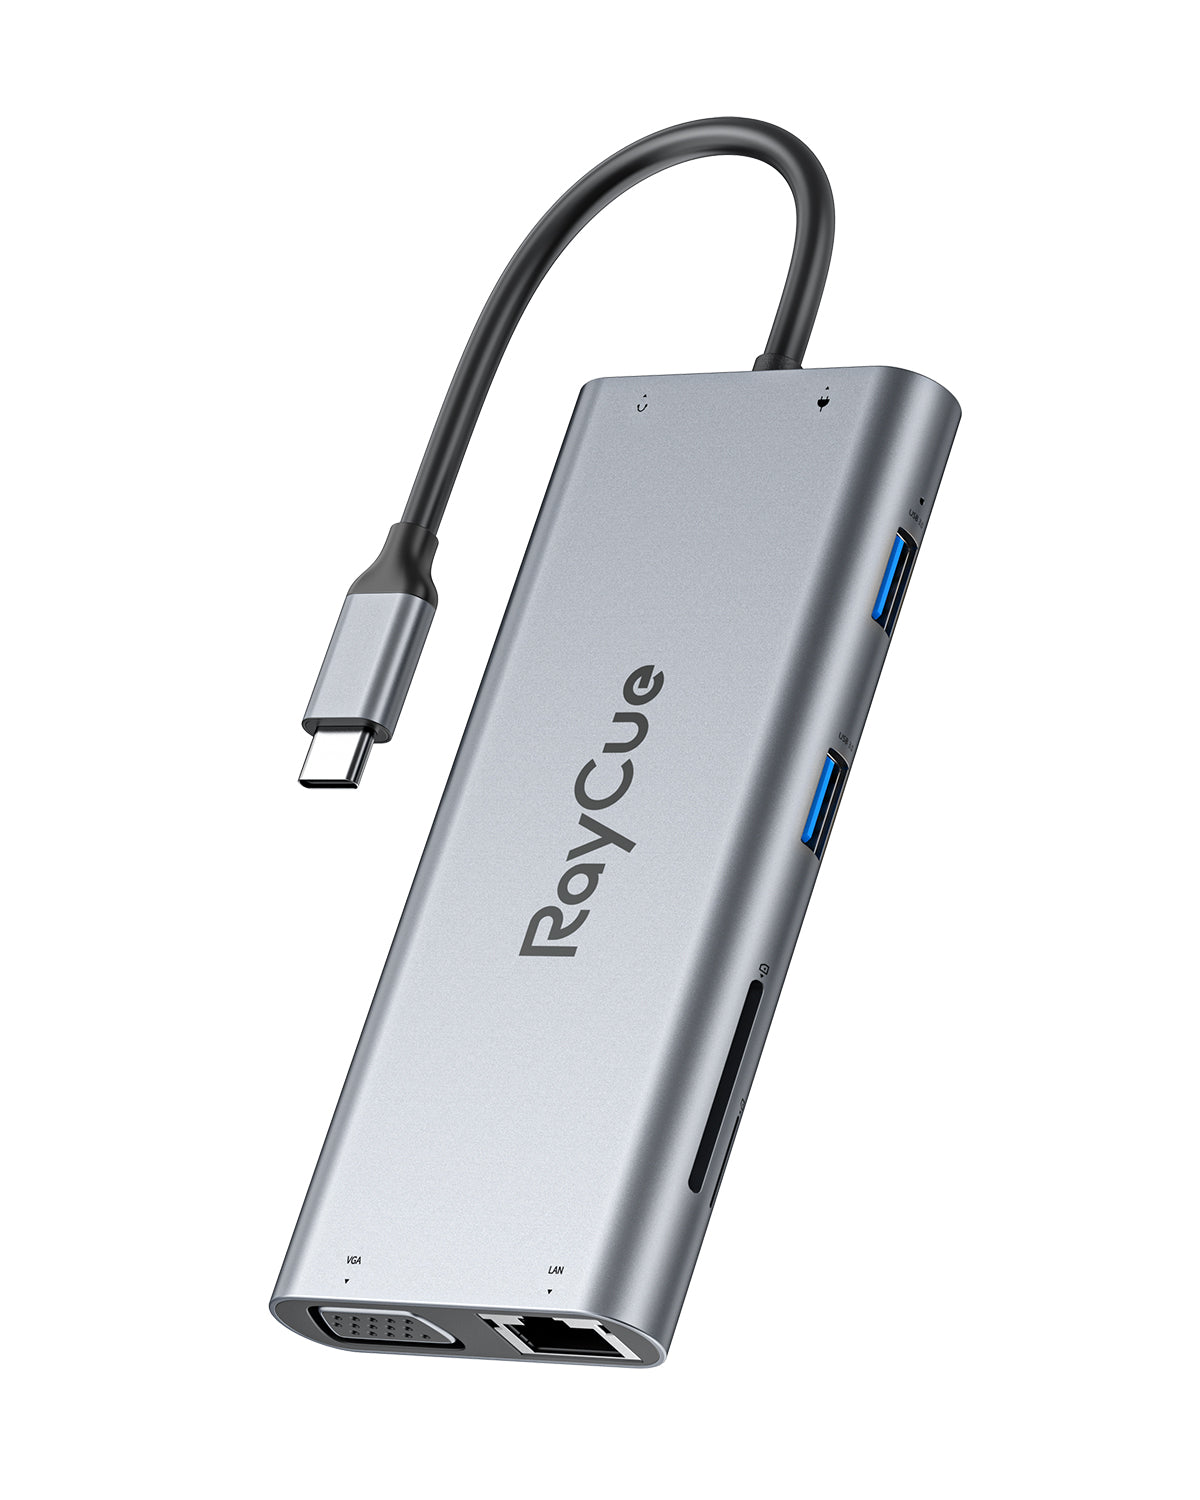 RayCue ExpandPro Prime+ 11-in-1 USB-C Hub/Docking Station